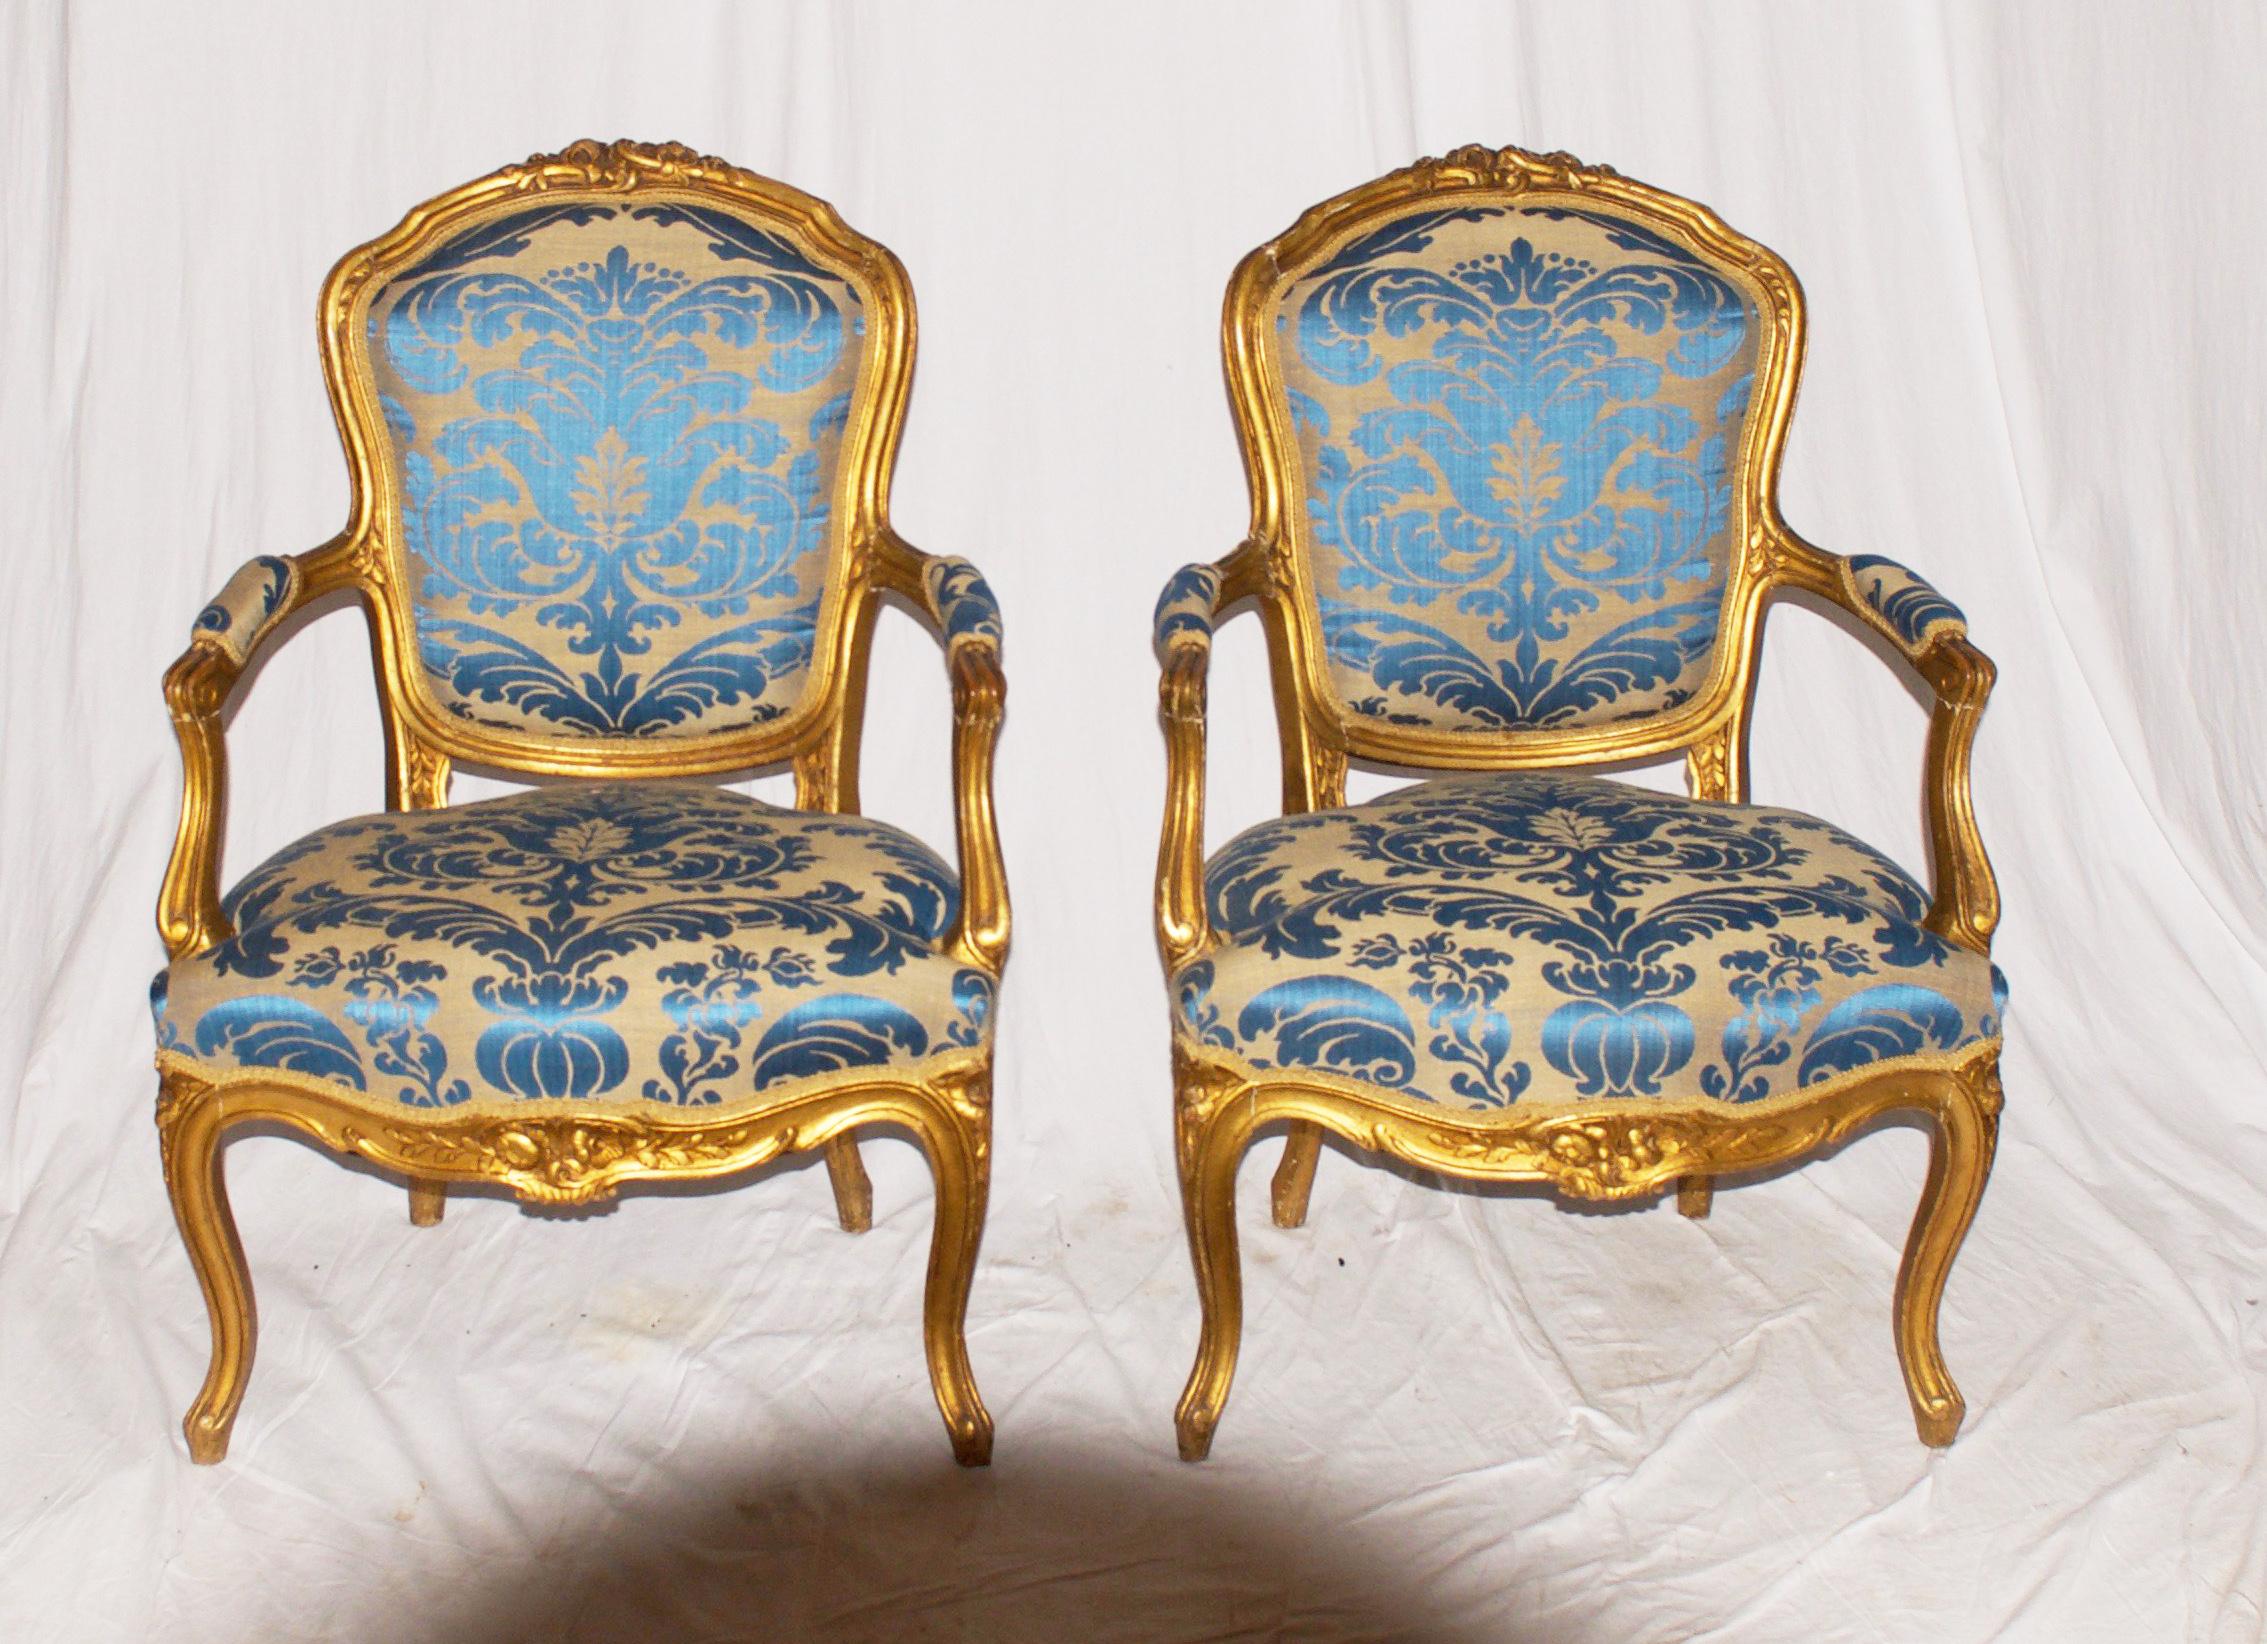 Sculpted and gilded wood. Later part of the 18th century.
Scratches, marks, stains, new silk upholstery.